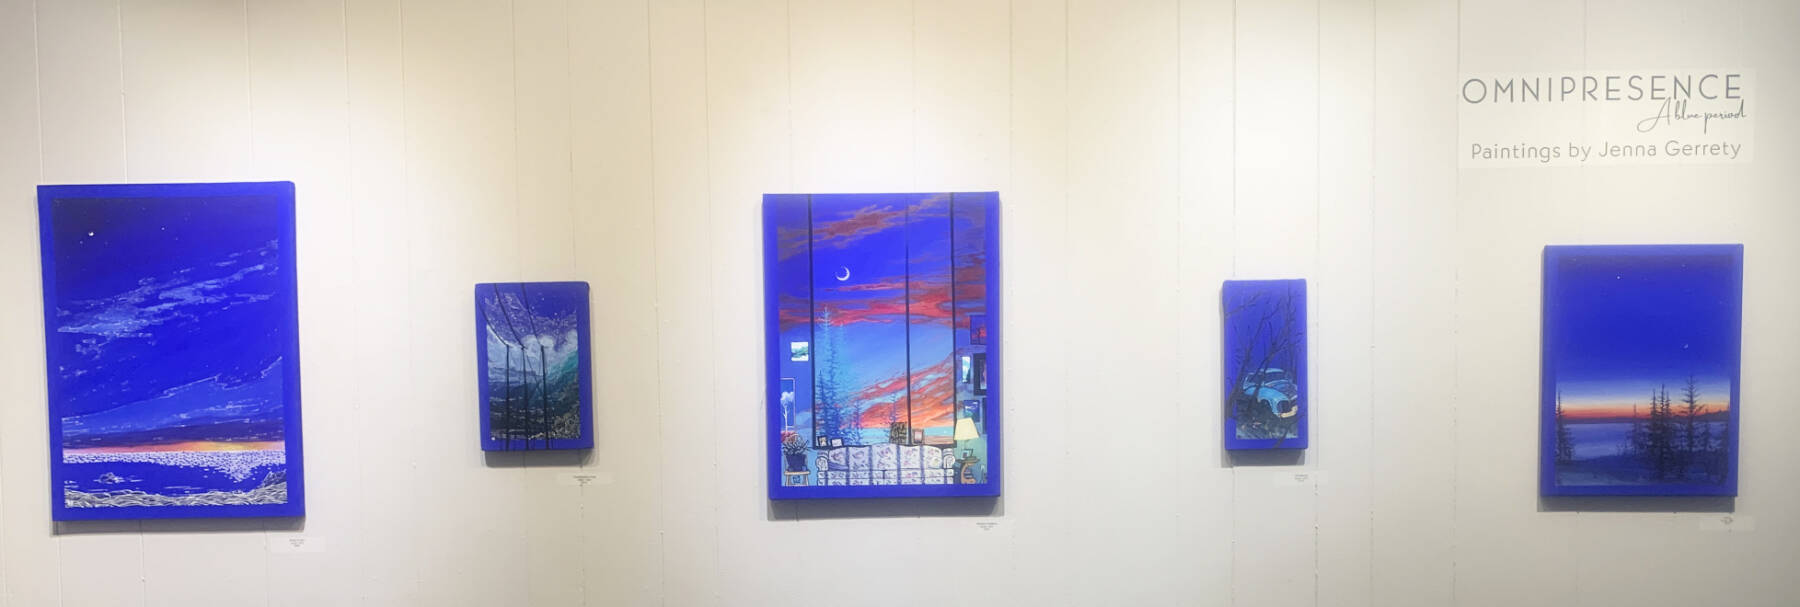 Paintings by Jenna Gerrety as part of her exhibit, “Omnipresence, A Blue Period,” are on display at Homer Council on the Arts through June. Photo by Christina Whiting